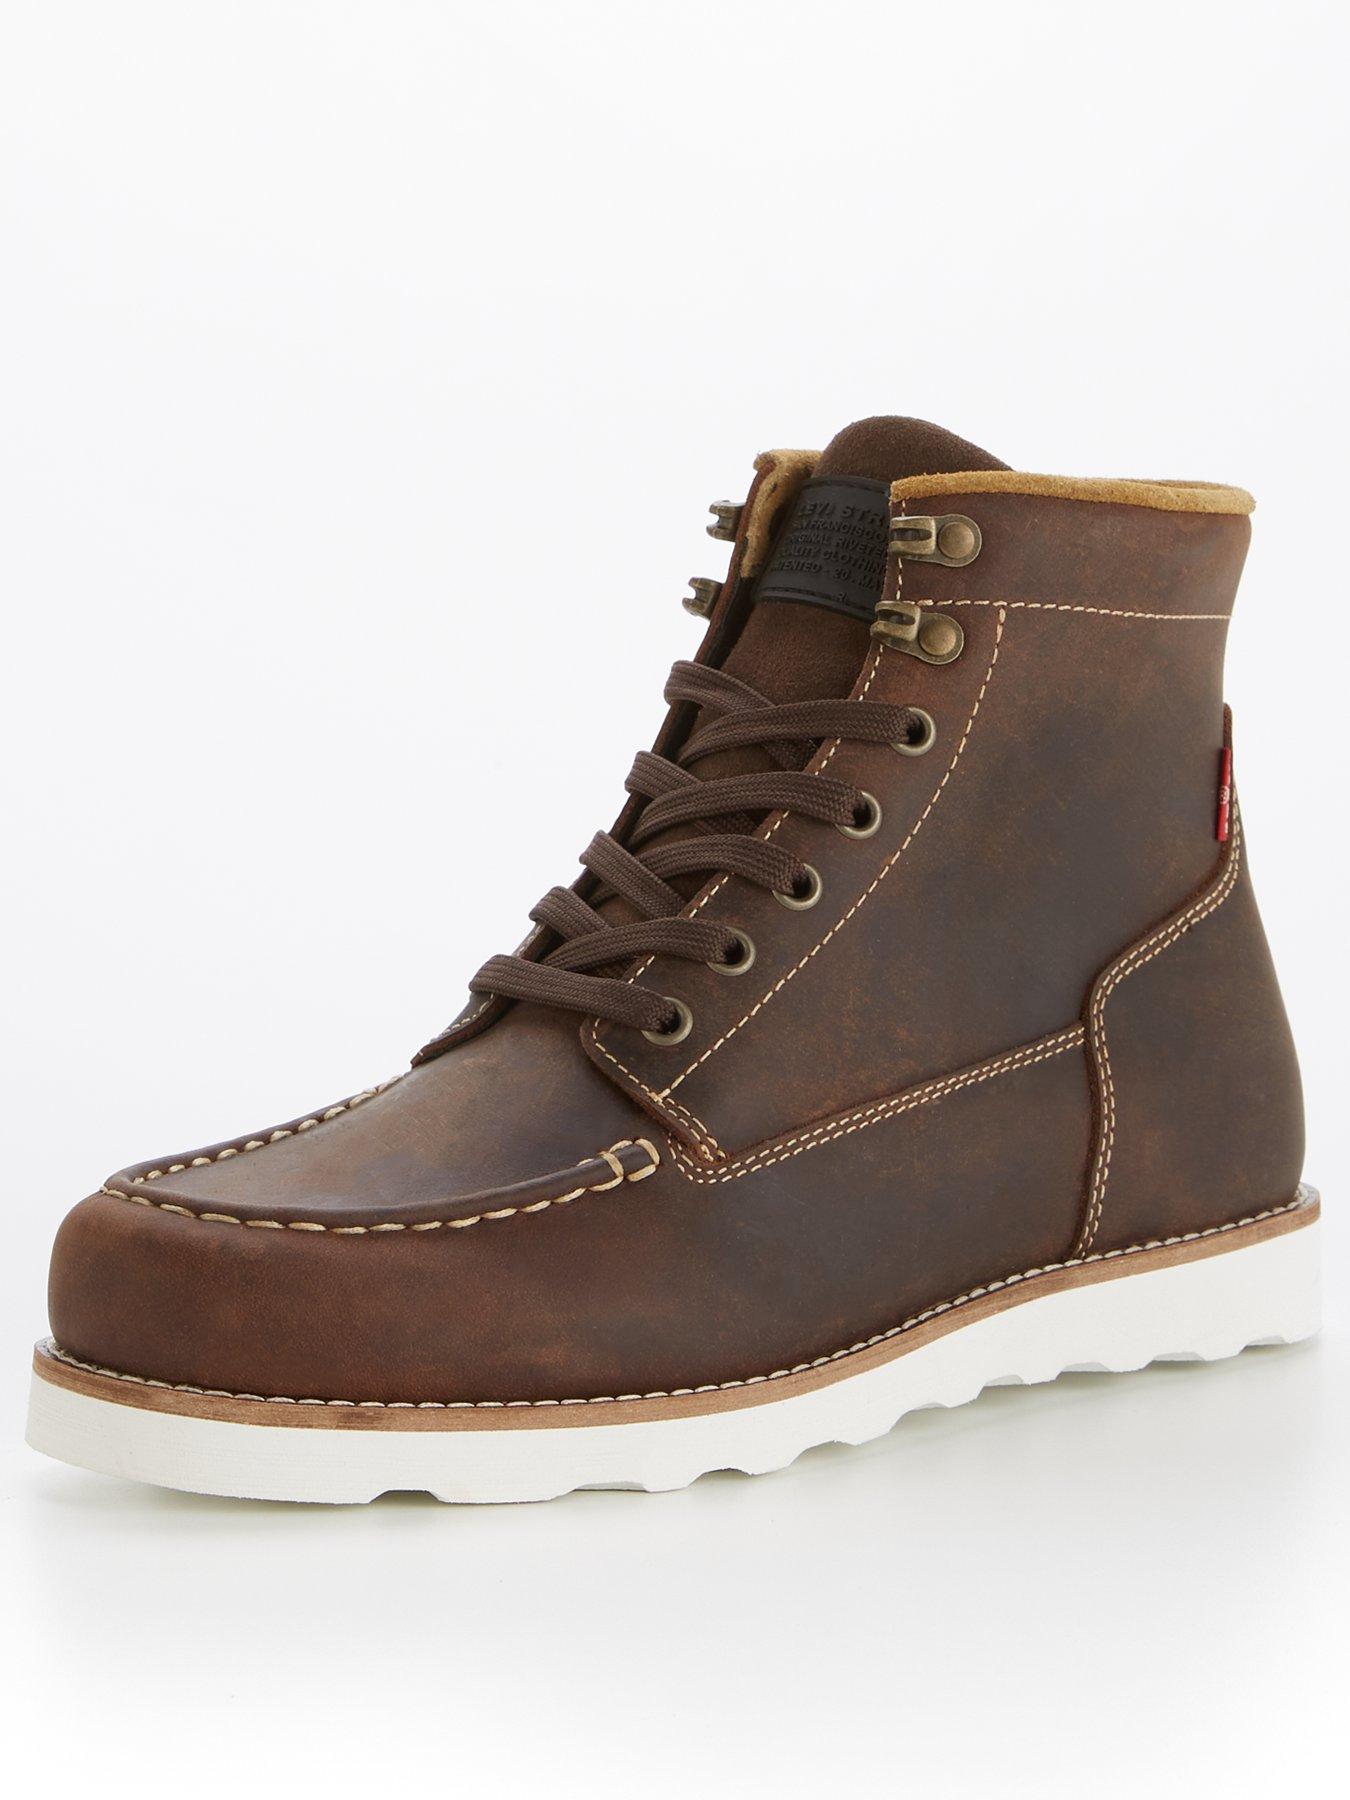 Levi's Darrow Mocc Leather Boots - Brown | very.co.uk